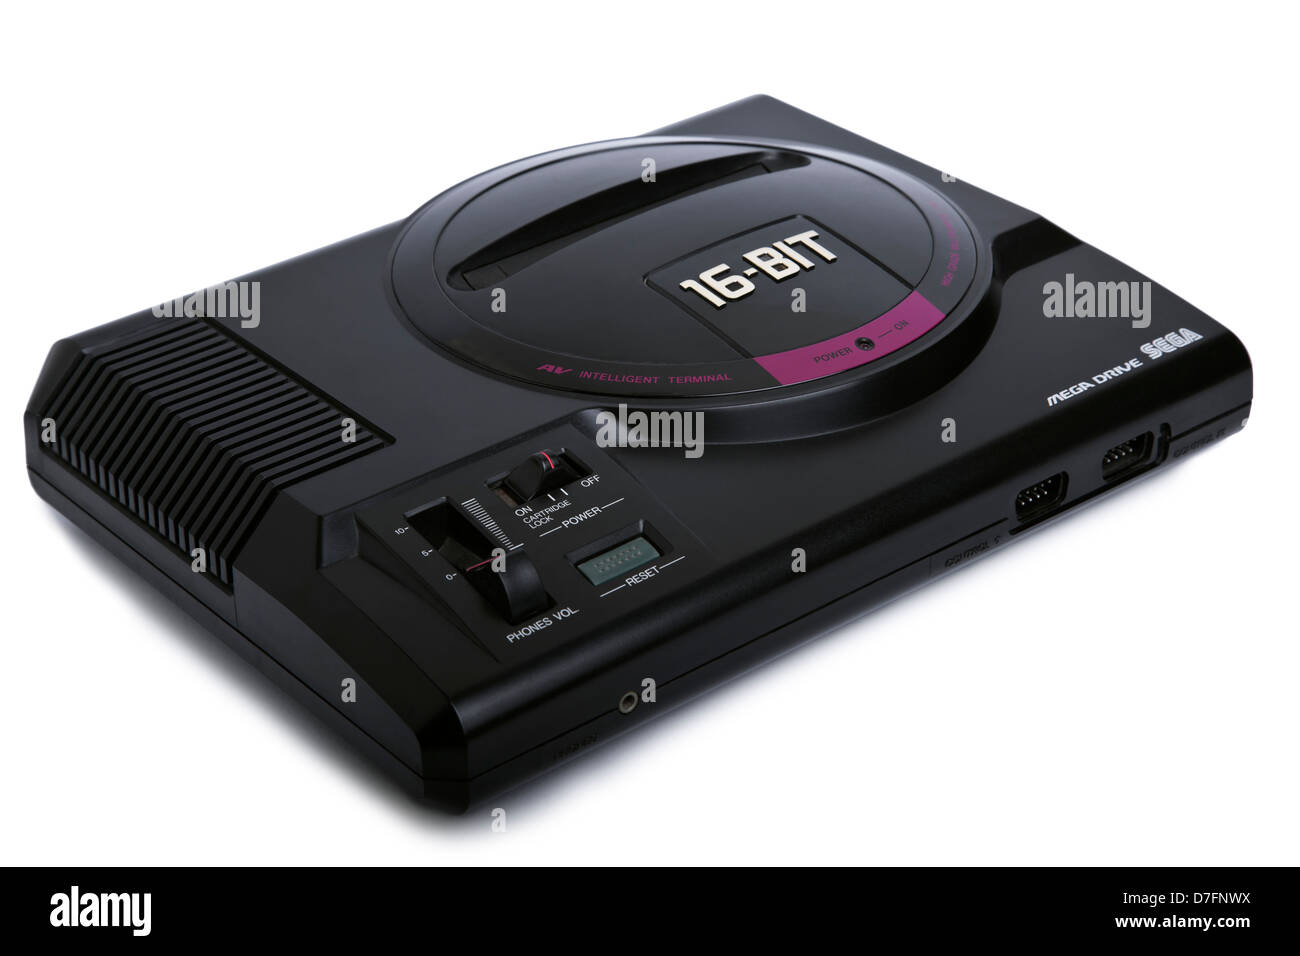 A Sega Mega Drive video game console from the 1990's. Stock Photo